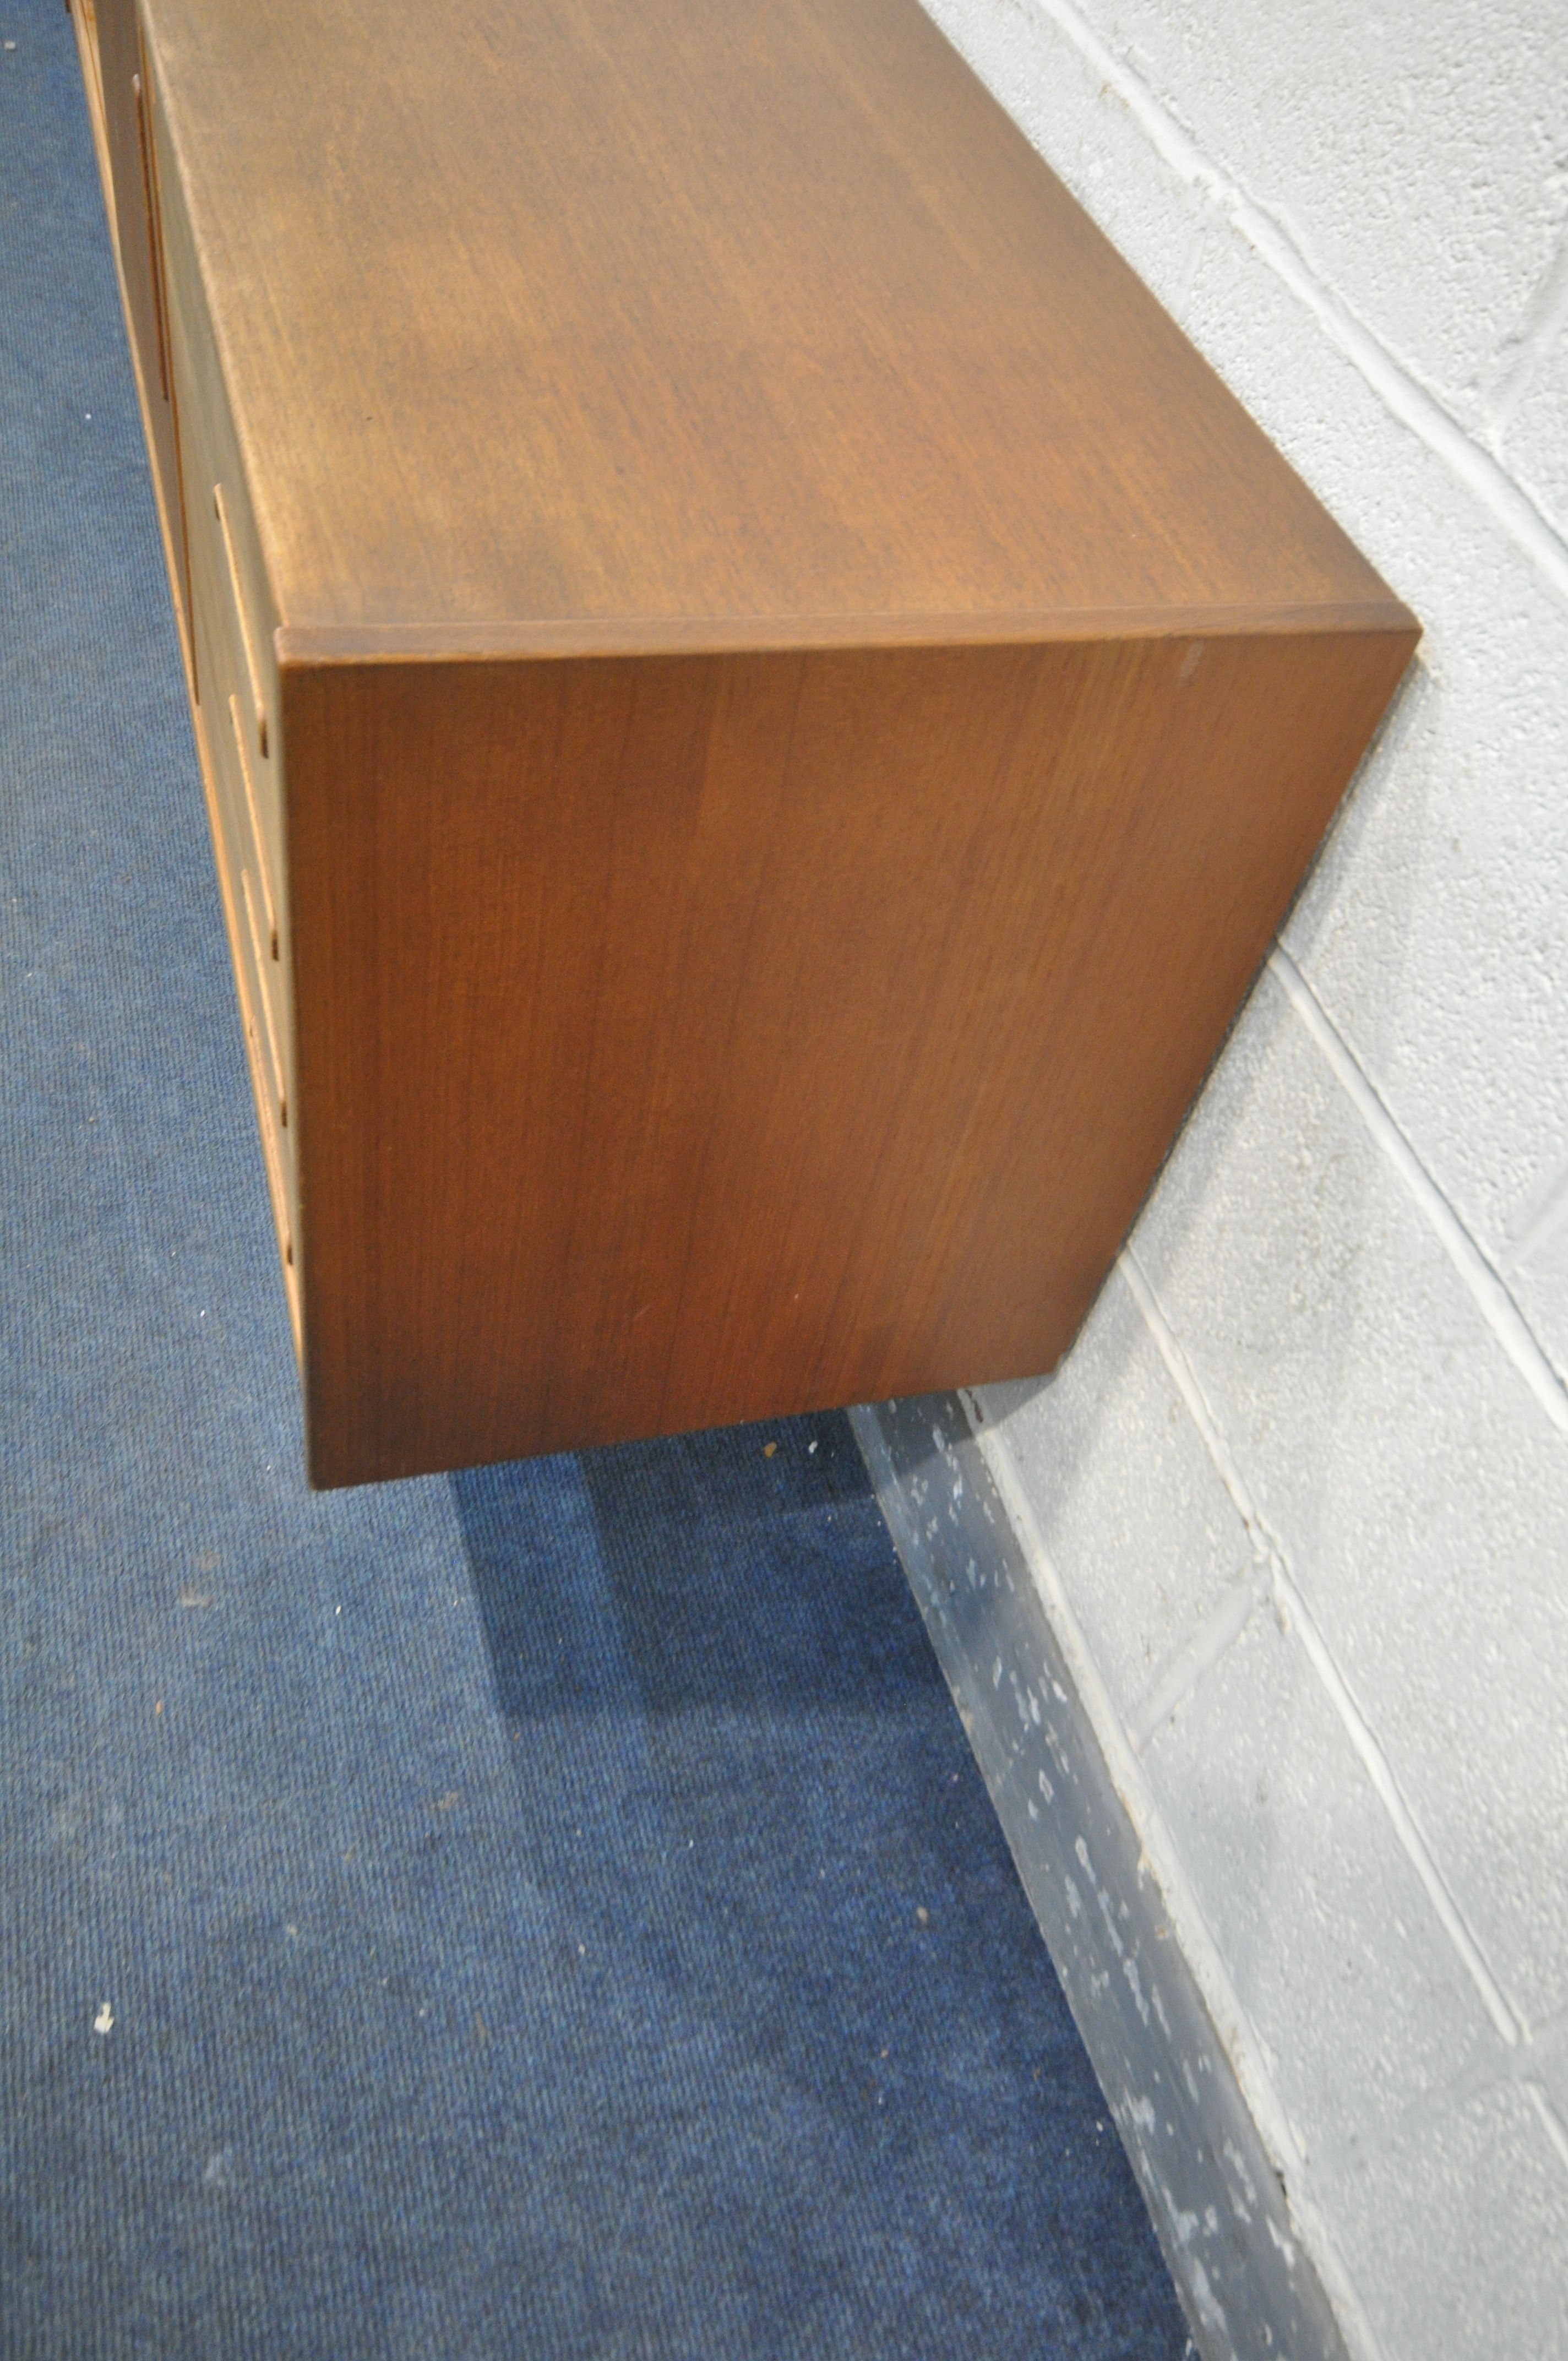 NILS JONSSON FOR TROEDS, A MID CENTURY MODEL 'TRENTO' TEAK SIDEBOARD, with double sliding doors, - Image 5 of 9